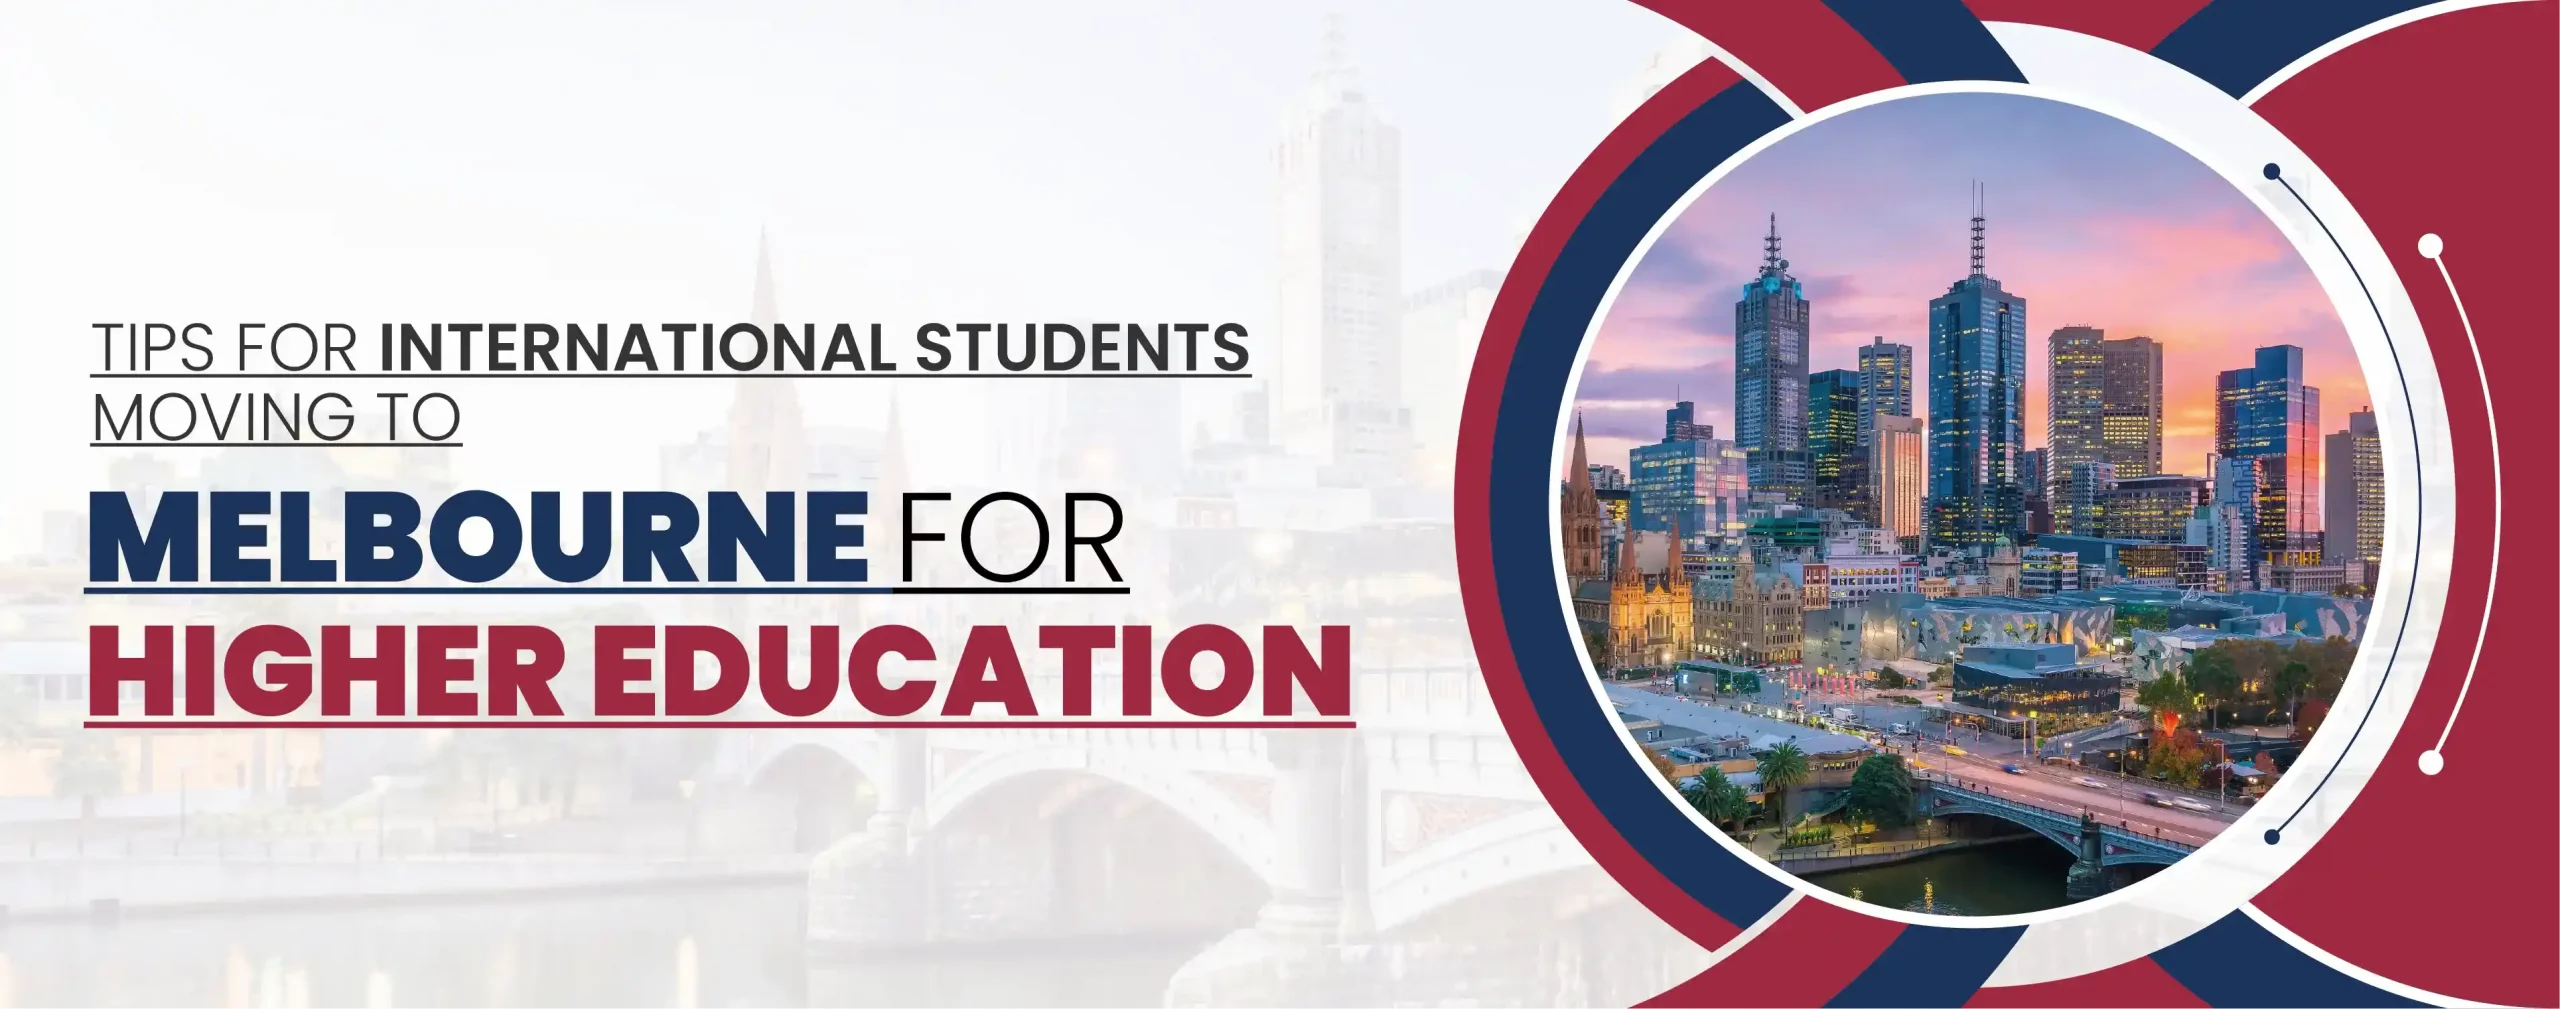 Tips for International Students Moving to Melbourne for Higher Education